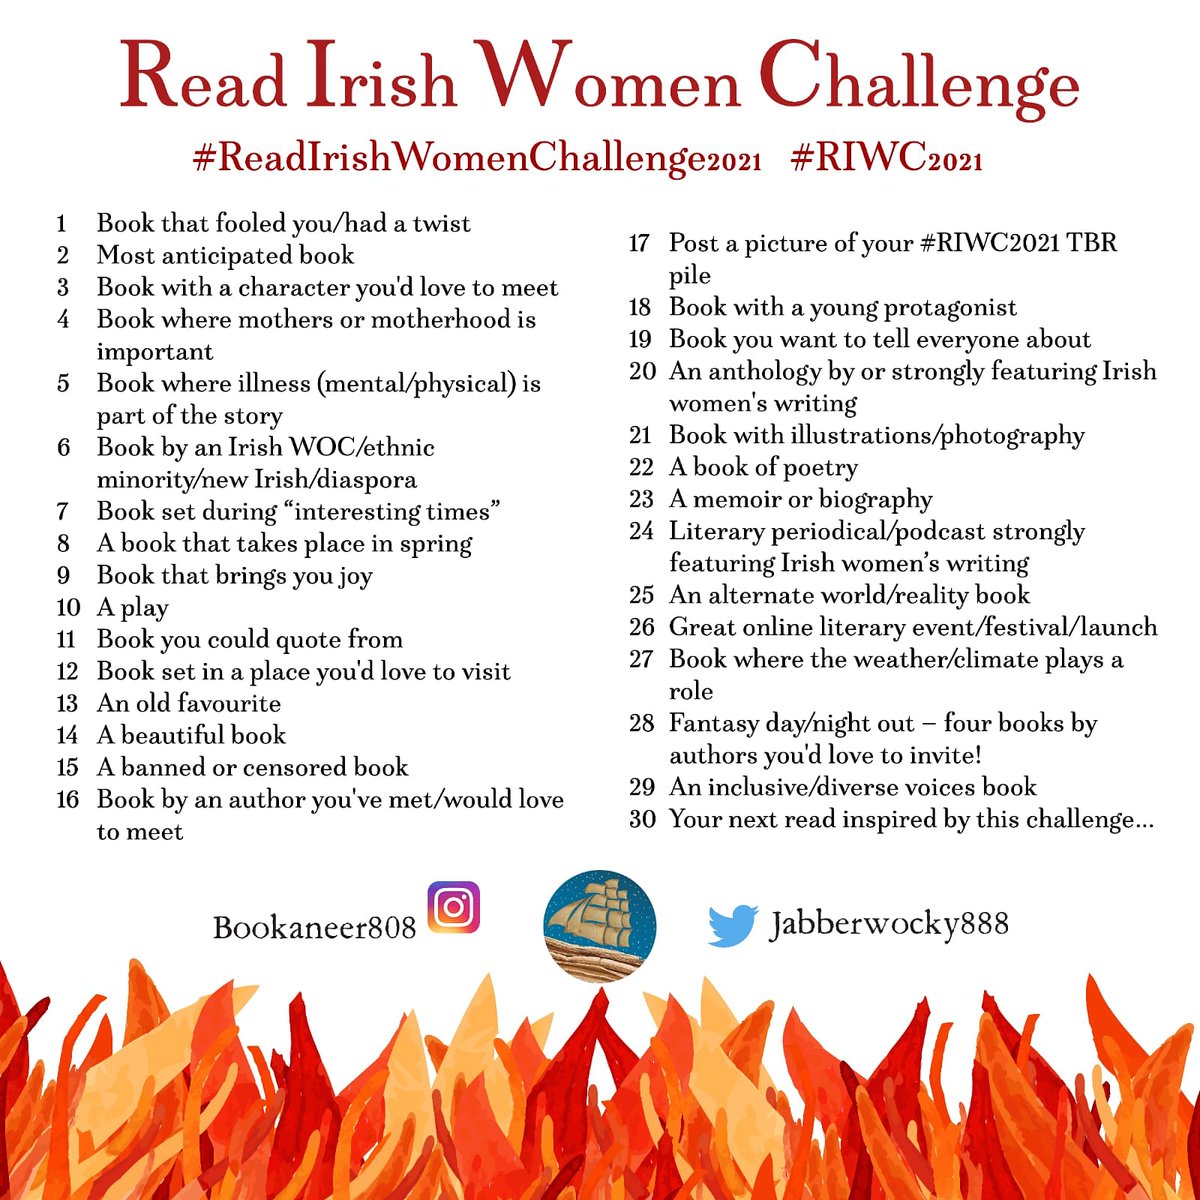 Day 14 of the  #ReadIrishWomenChallenge2021: a beautiful bookThe Pooka Party by  @ShonaShirleyMacThe Pooka is a magical shapeshifter who realises that it's lonely and hasn't seen its friends in ages! After having some time to think, the Pooka decides to throw a big party.